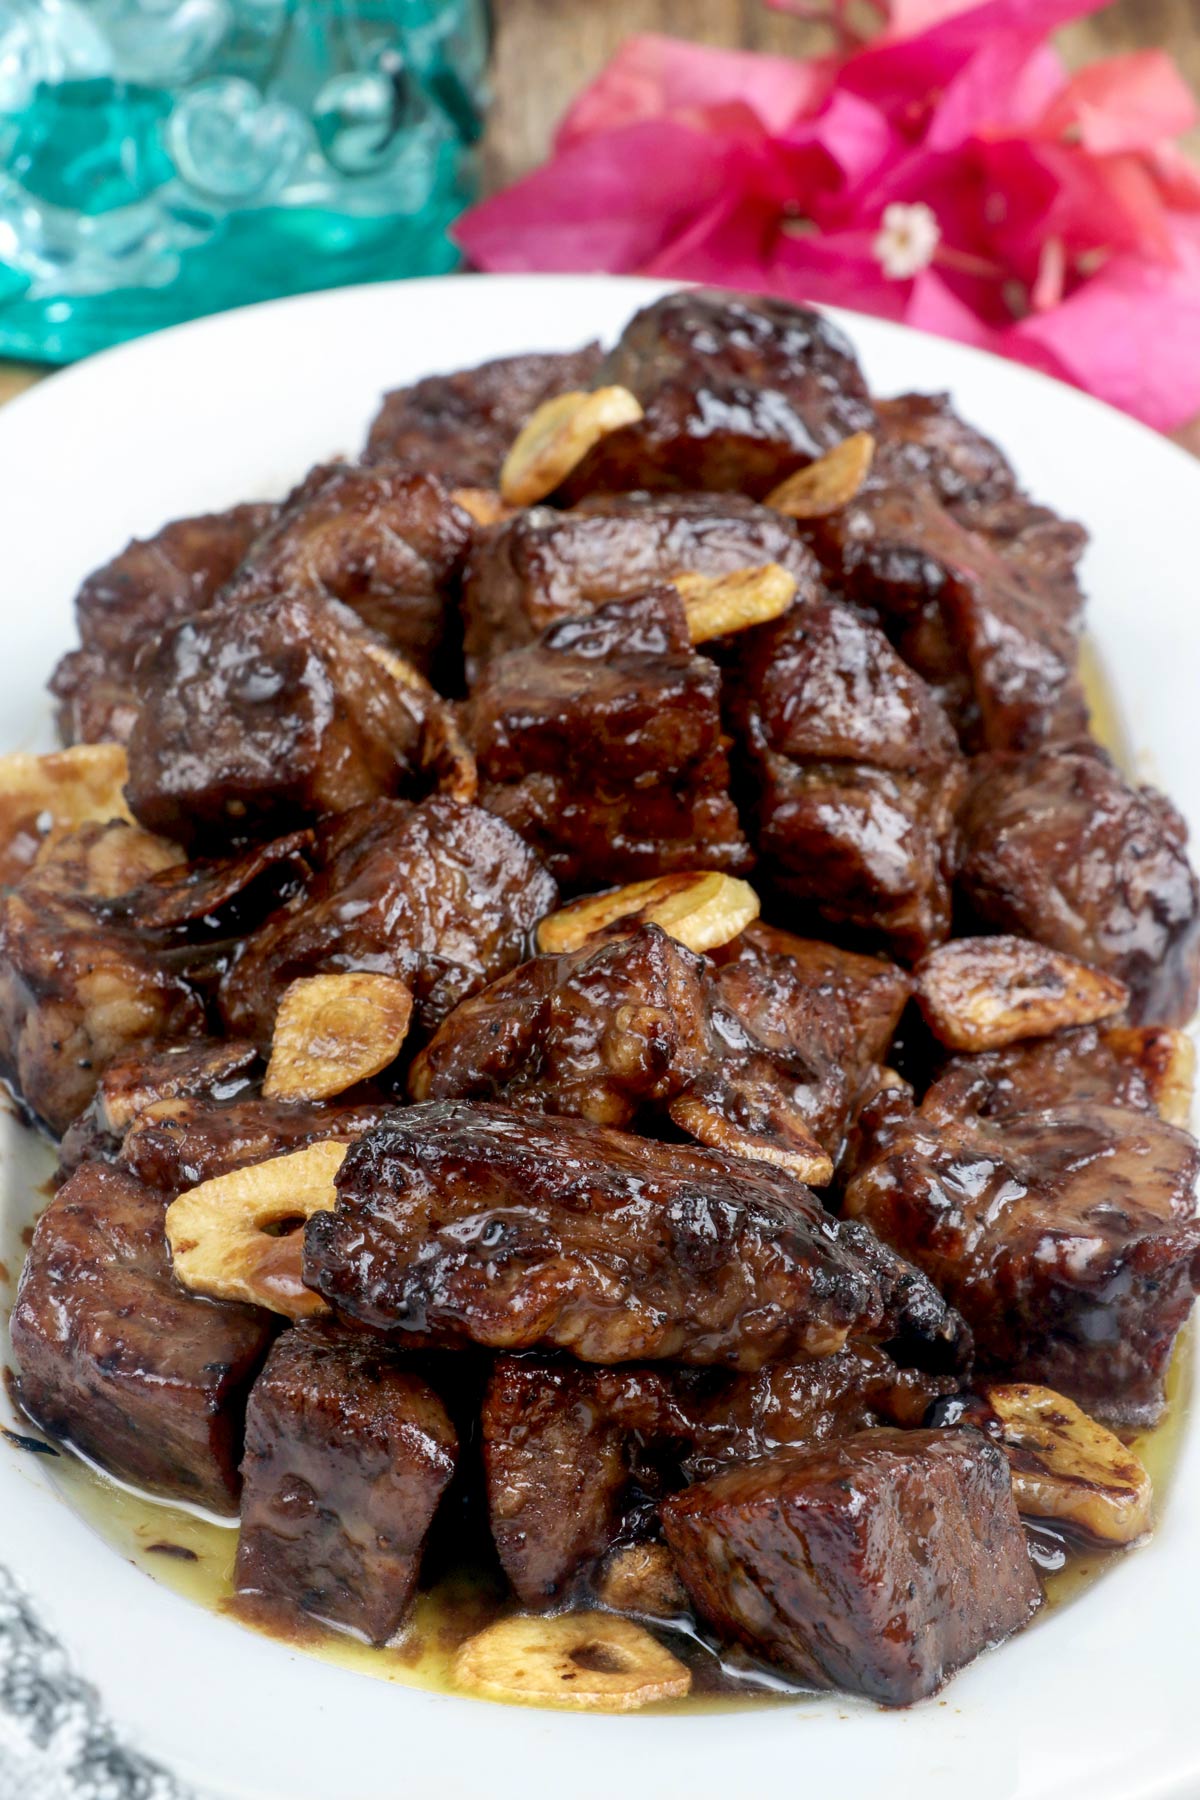 Beef Salpicao with tender beef chunks coated with a savory sauce.